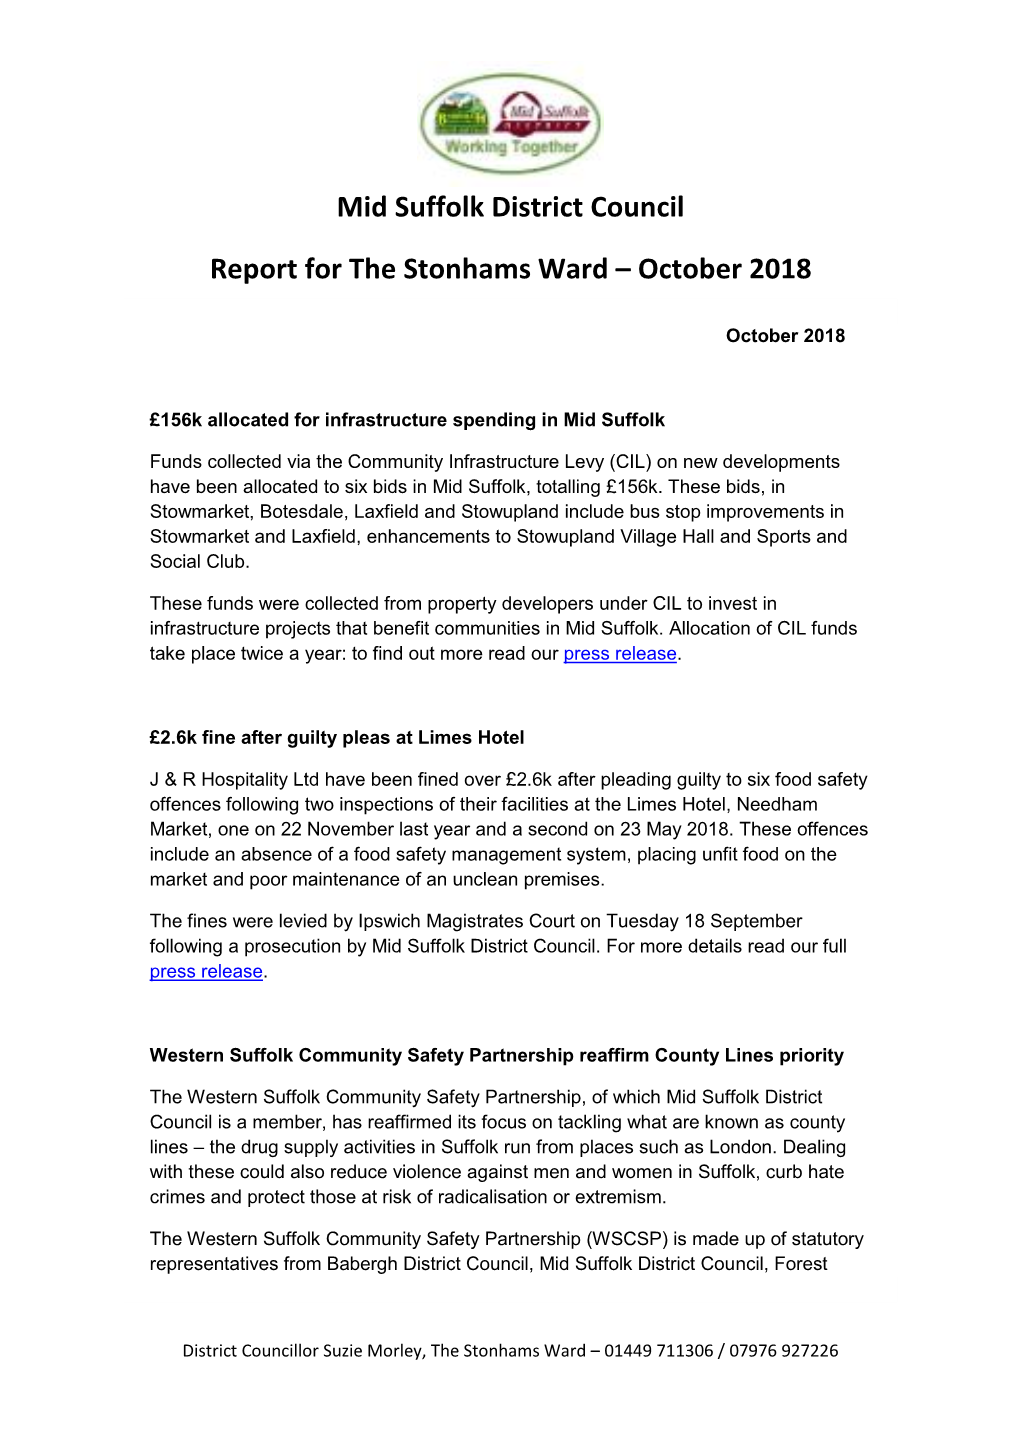 Mid Suffolk District Council Report for the Stonhams Ward – October 2018